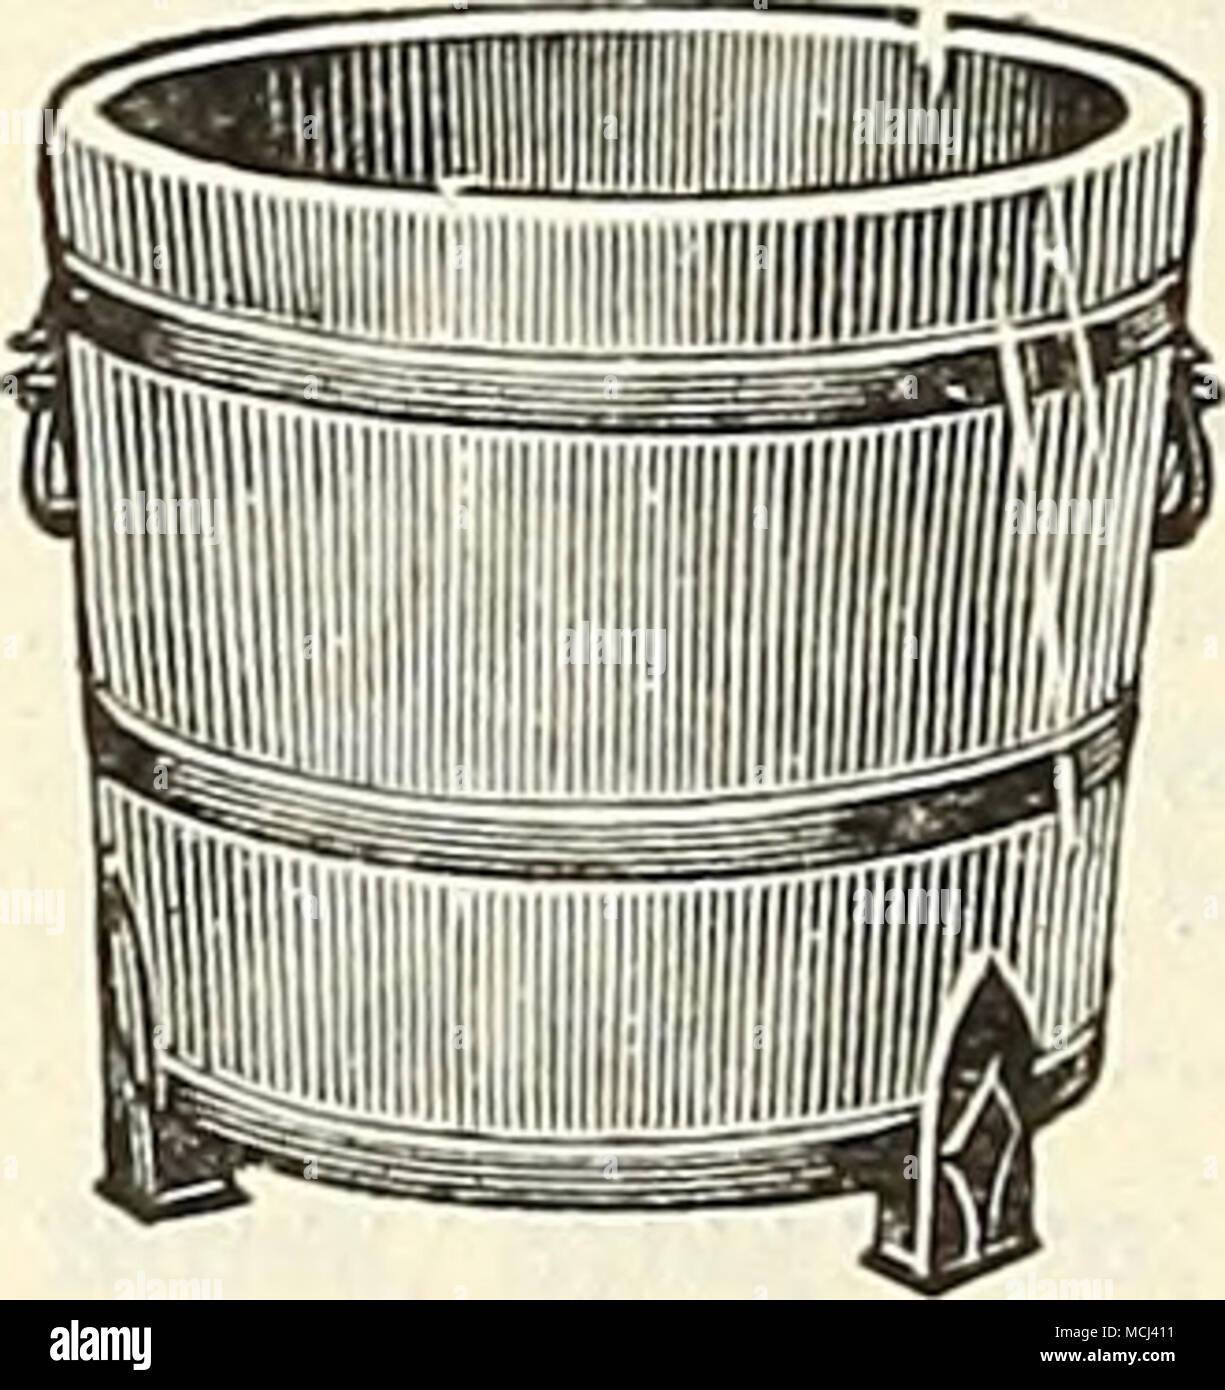 . HEAVY TREE AND PLANT TUBS Made of white cedar, painted green and bound with extra heavy iron hoops; drop handles and iron feet supplied with all sizes. Removable bottom. He.wy Tree .^nd Plant Tub No. 8 No. 7 No. 6 No. 5 No. 4 No. 3 No. 2 No. 1 No. 0 Outside Diam. in. 12 13 14 16 18 21 23 25 27 Inside Diam. in. lOf Hi 121 Ui 16| 18f 21 23i 25 Length of Stave in. n 10 12 14 16 18 20 21i 24 Each .$3 55 . 4 10 . 4 65 . 5 85 . 6 50 . 8 05 . 9 90 .11 10 .12 50 RUBBER FLOWER POT SAUCERS Neat in appearance, waterproof. 45 in. diameter $0 15 each $1 50 dozen 5i 6i 71 -81 9i 101 m 18 20 25 40 55 65 85 Stock Photo